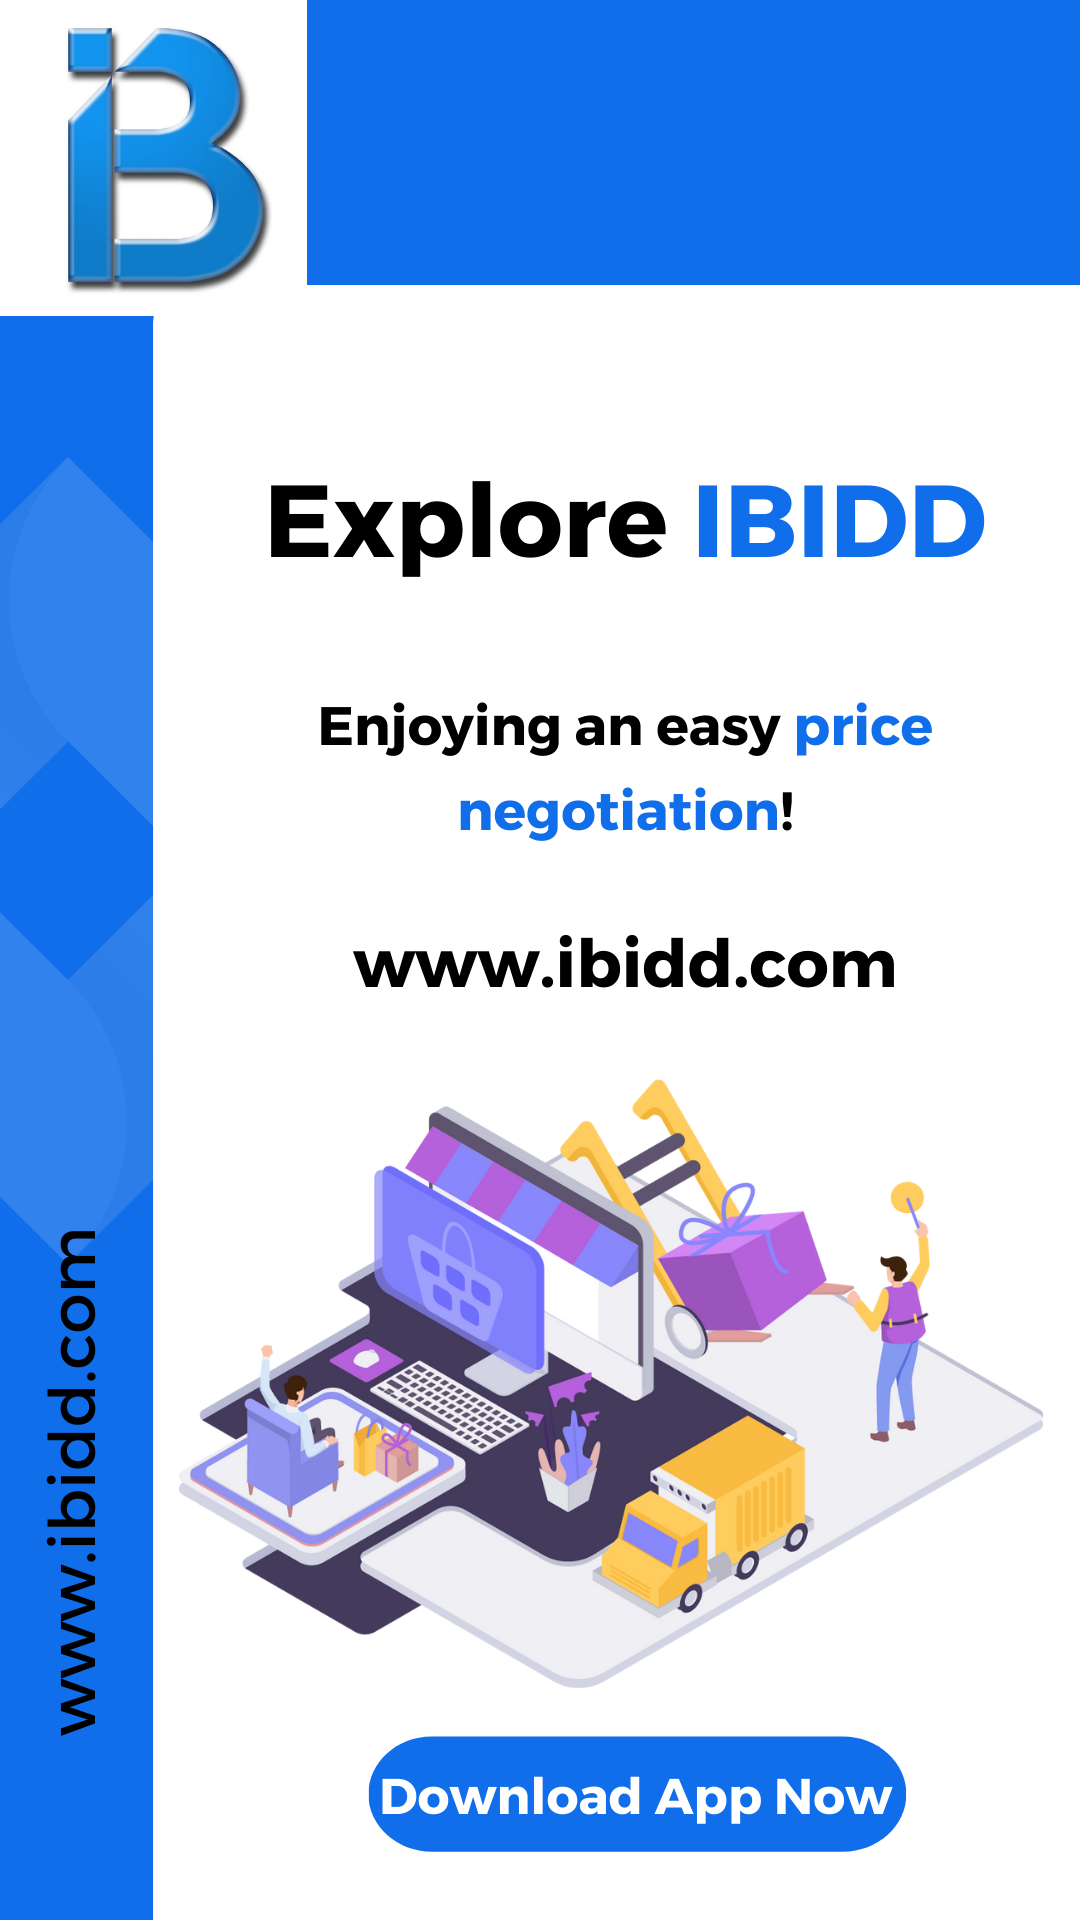 Try iBidd today